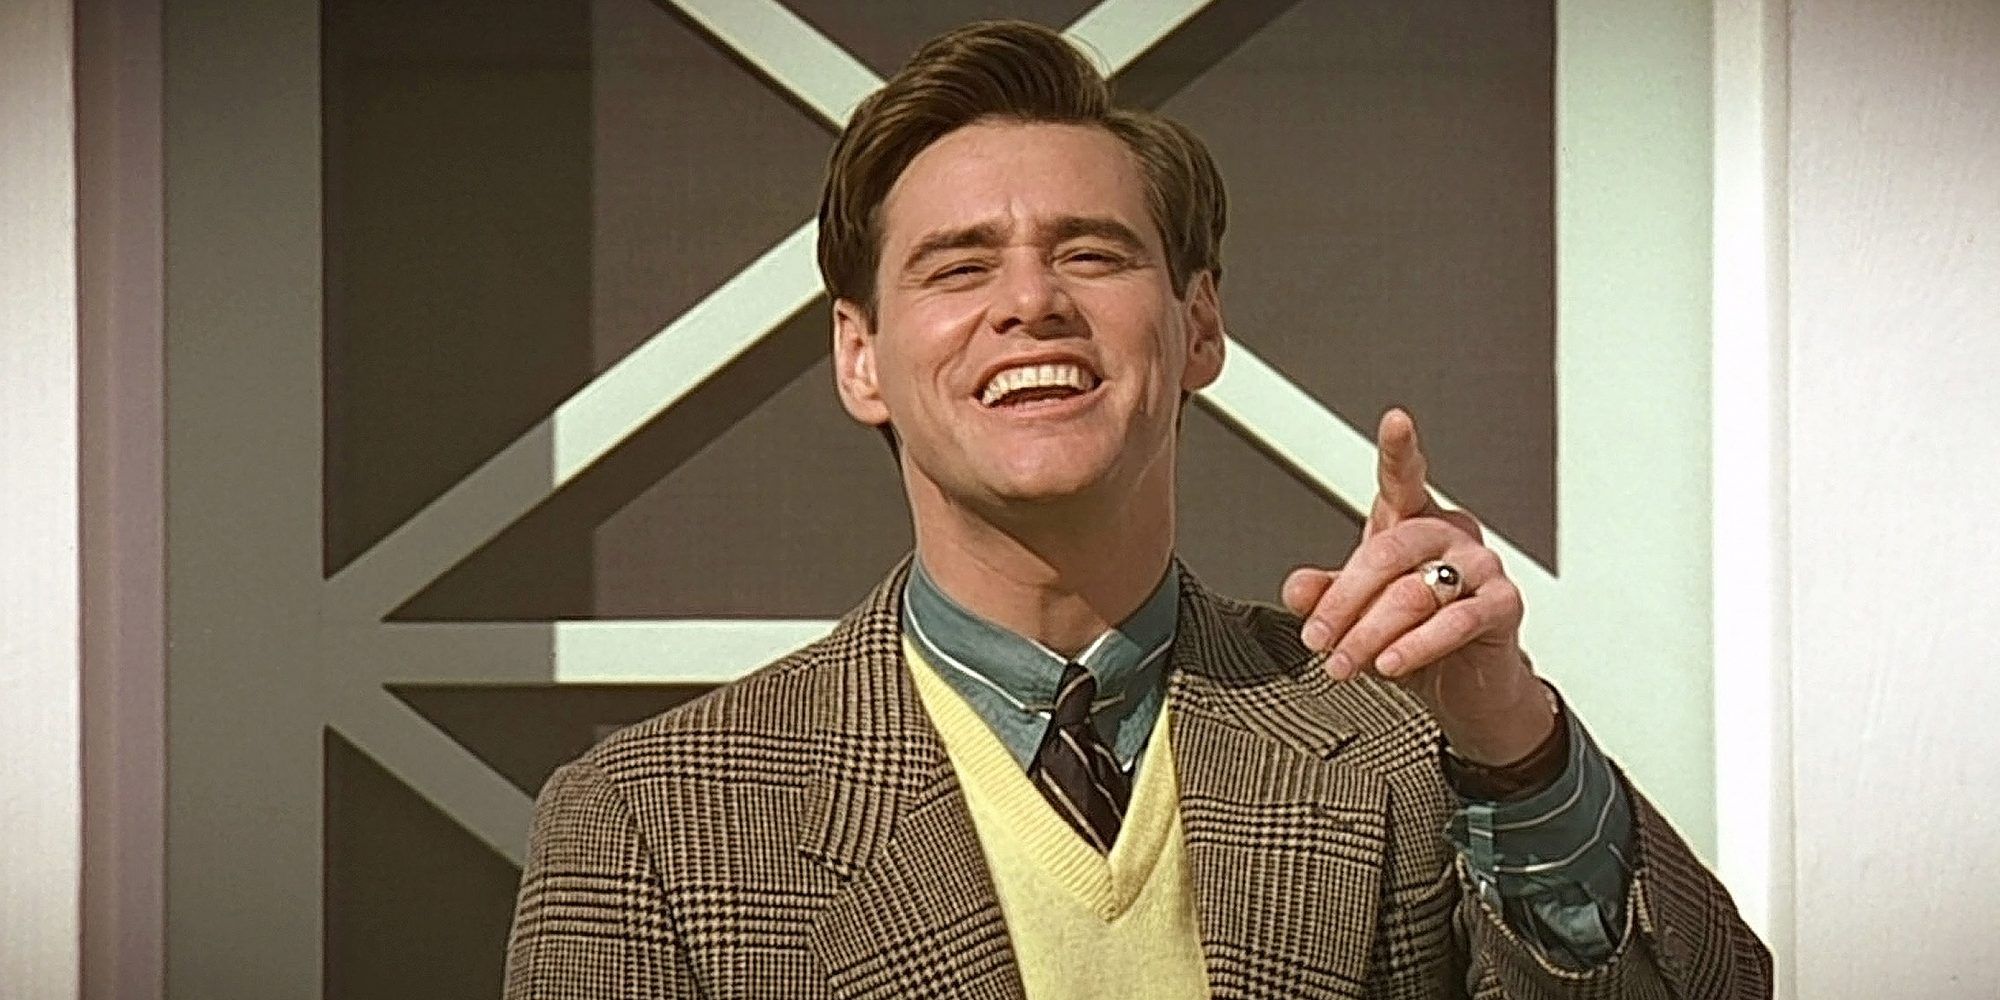 Truman addressing the camera and saying good morning in The Truman Show